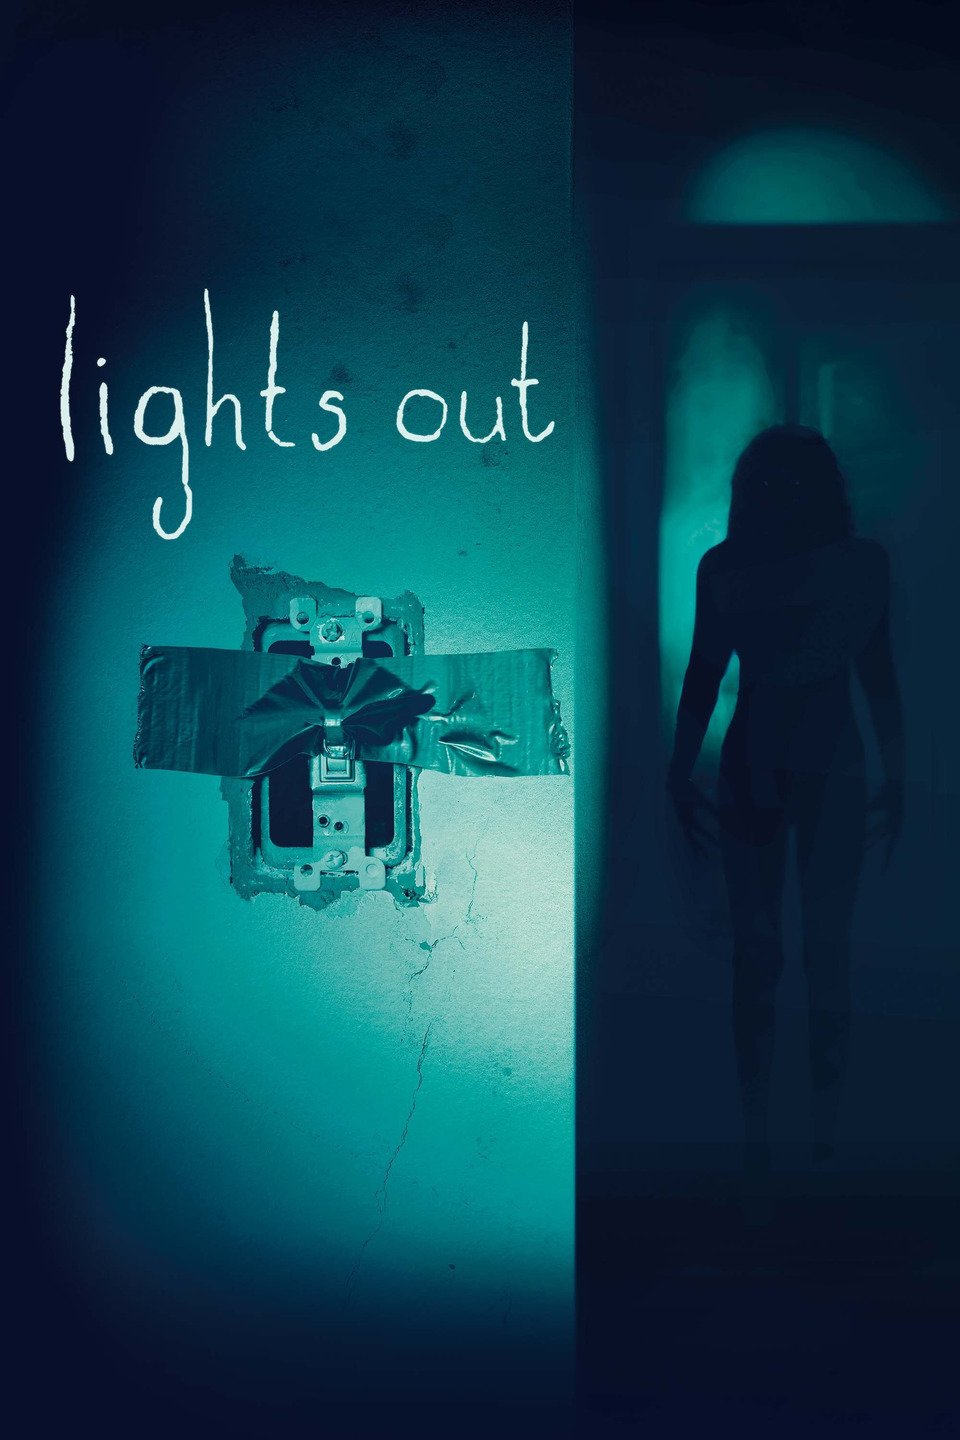 Lights Out: Trailer 1 - Trailers & Videos - Tomatoes